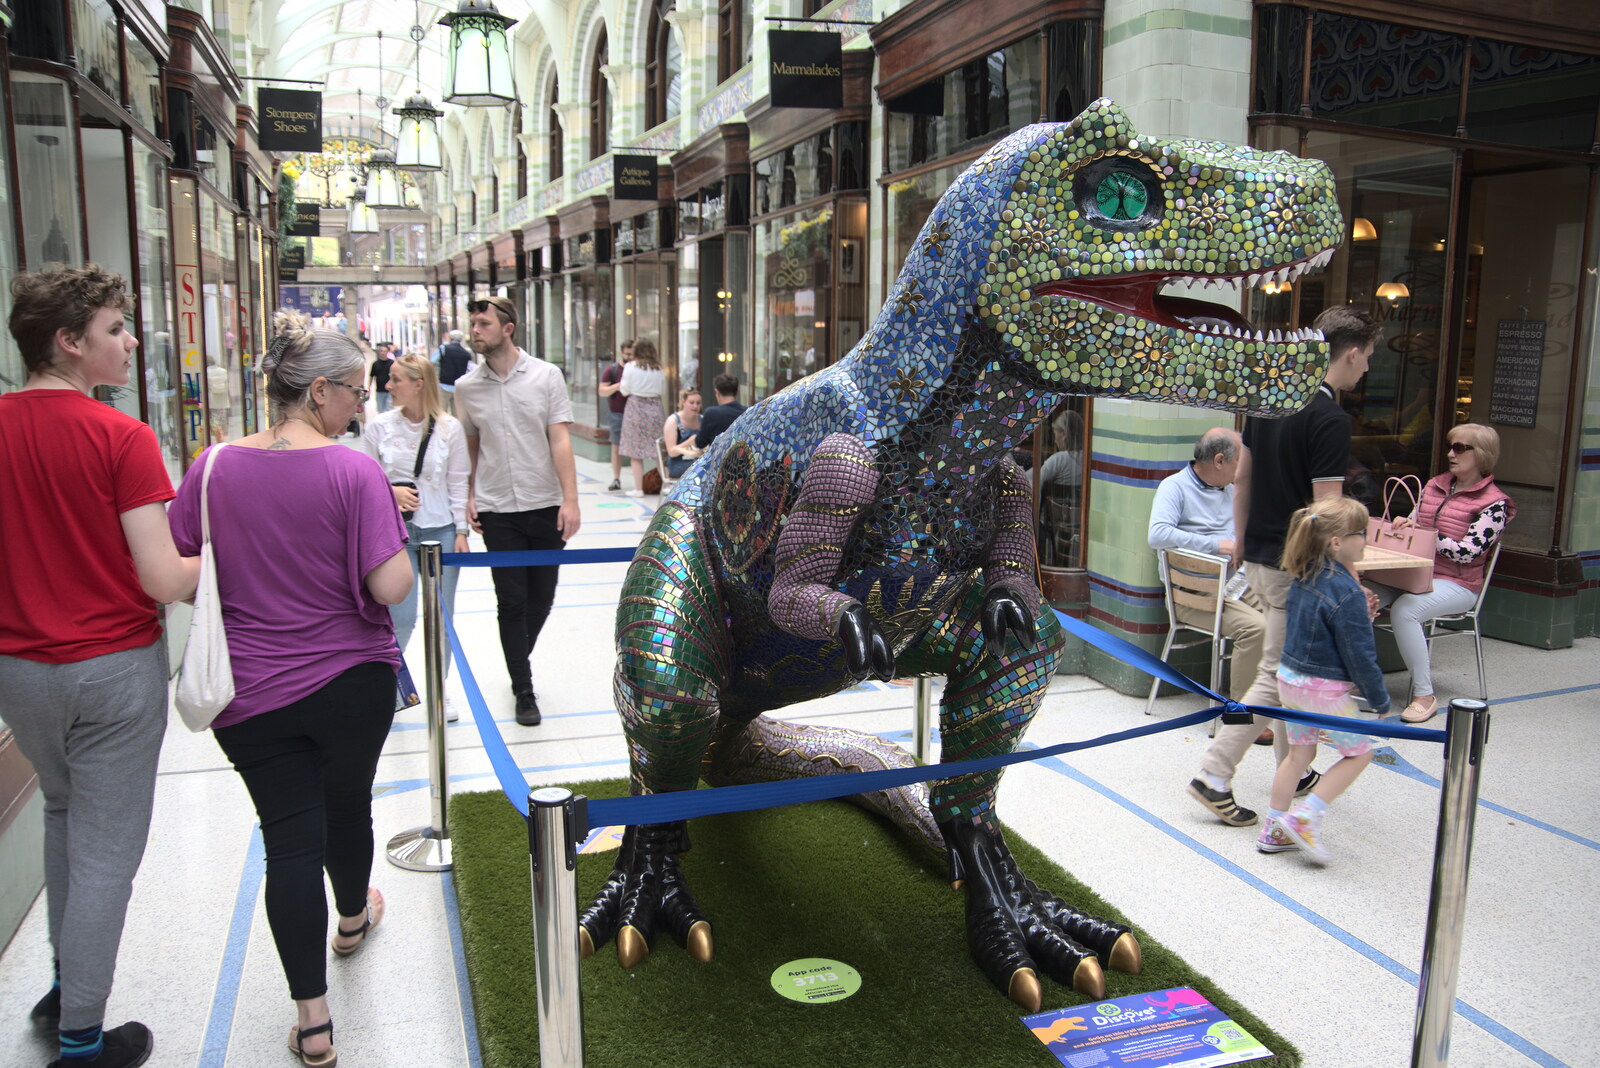 There's a spangly dinosaur in Royal Arcade from The Lord Mayor's Procession, Norwich, Norfolk - 2nd July 2022